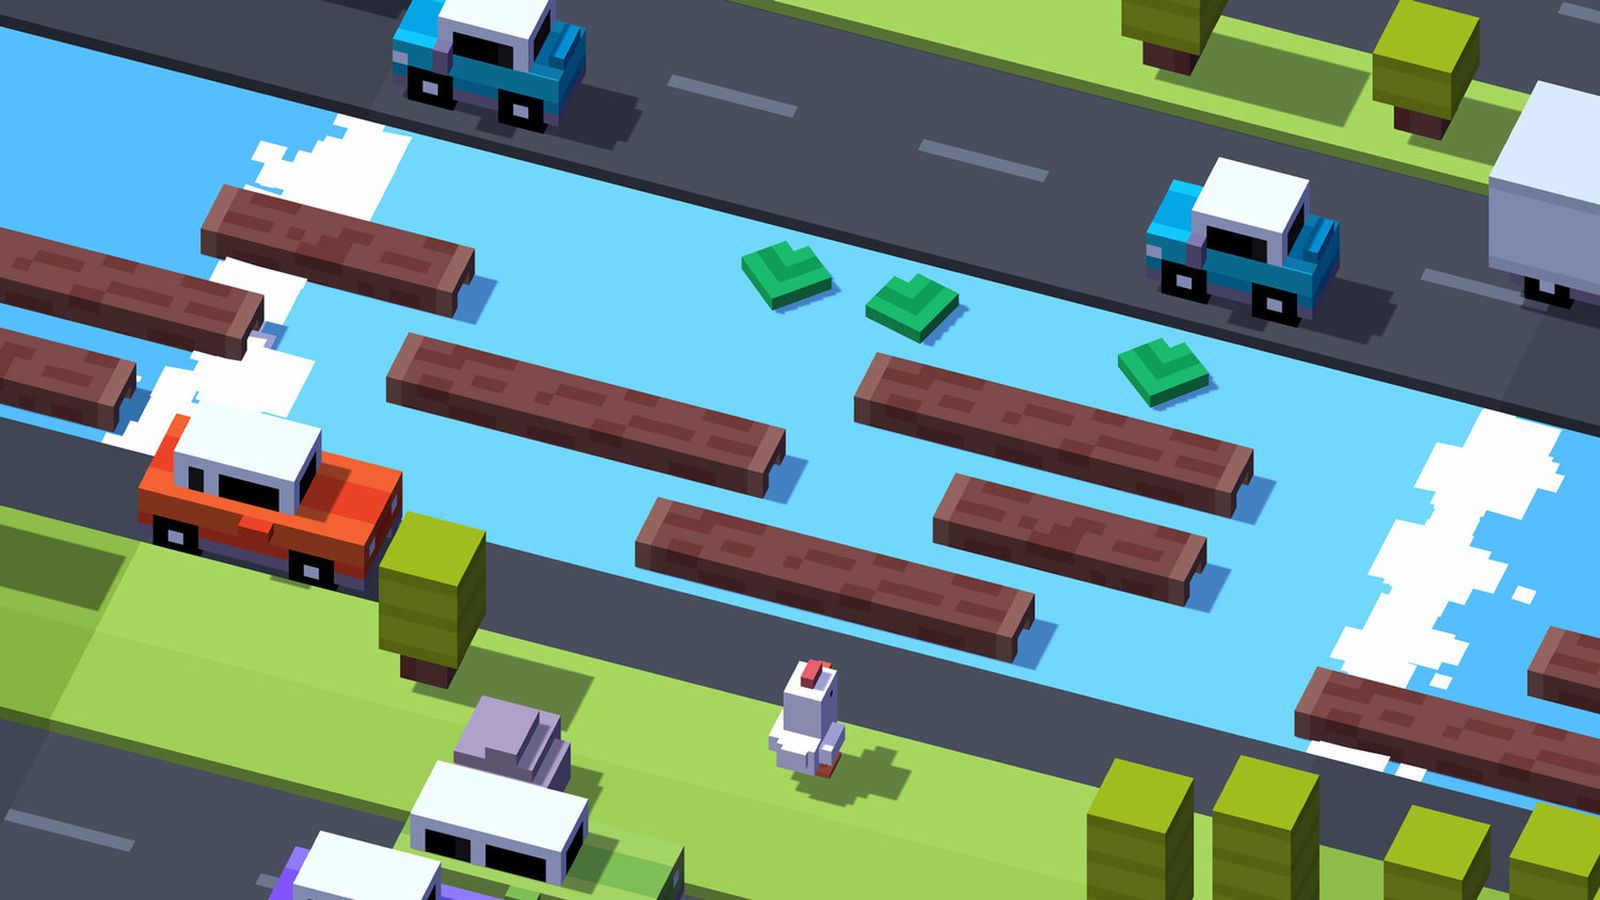 Hit iOS game Crossy Road will soon leap onto Apple Arcade